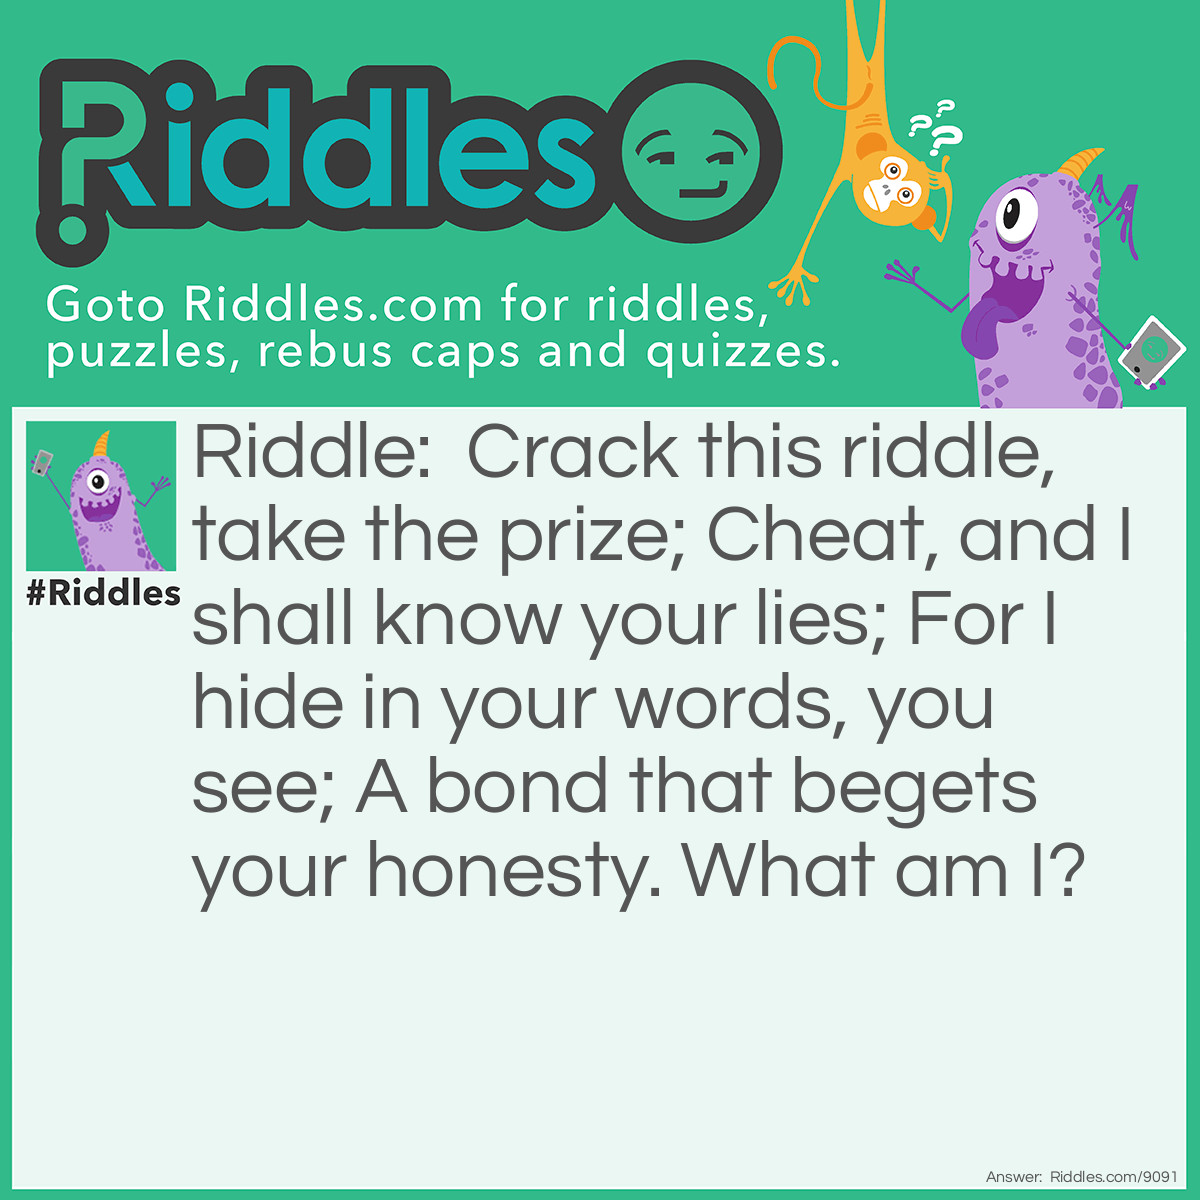 Riddle: Crack this riddle, take the prize; Cheat, and I shall know your lies; For I hide in your words, you see; A bond that begets your honesty. What am I? Answer: Truth.